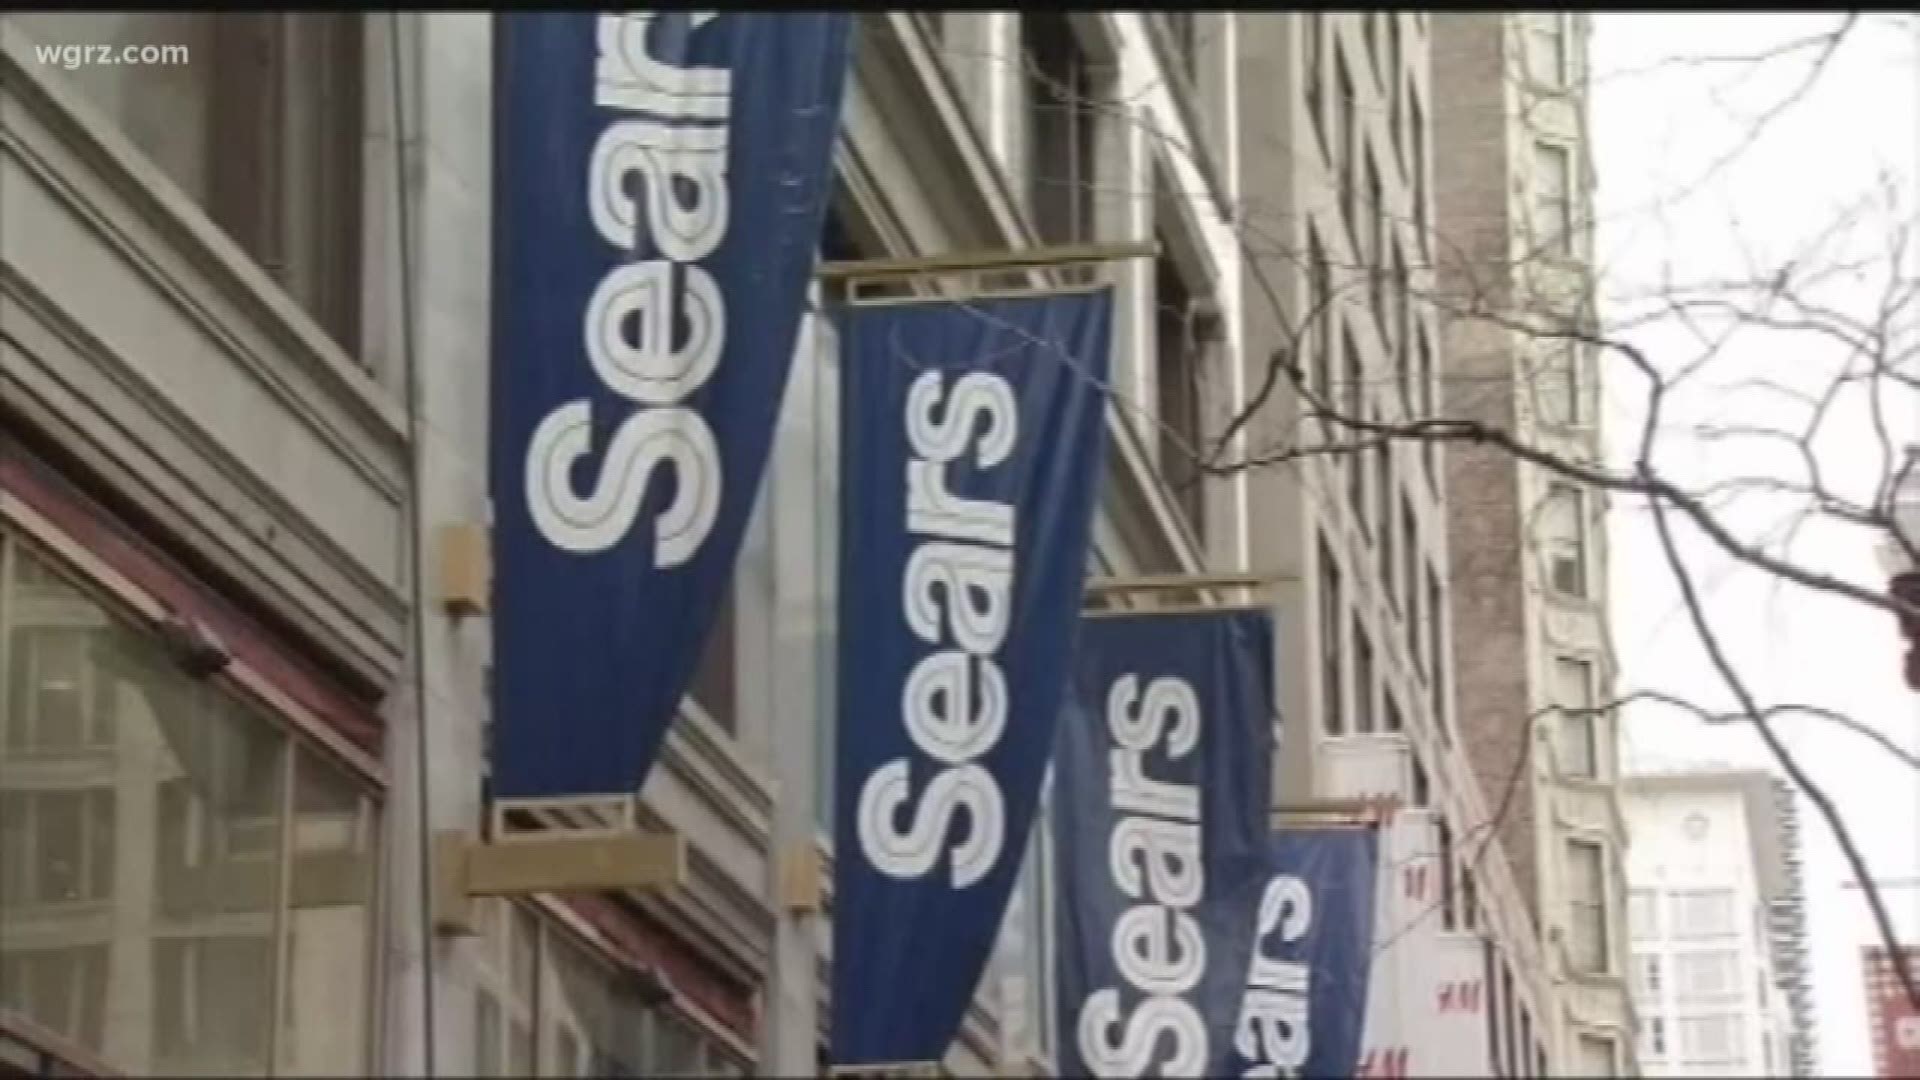 Sears closing 51 more stores including last WNY location